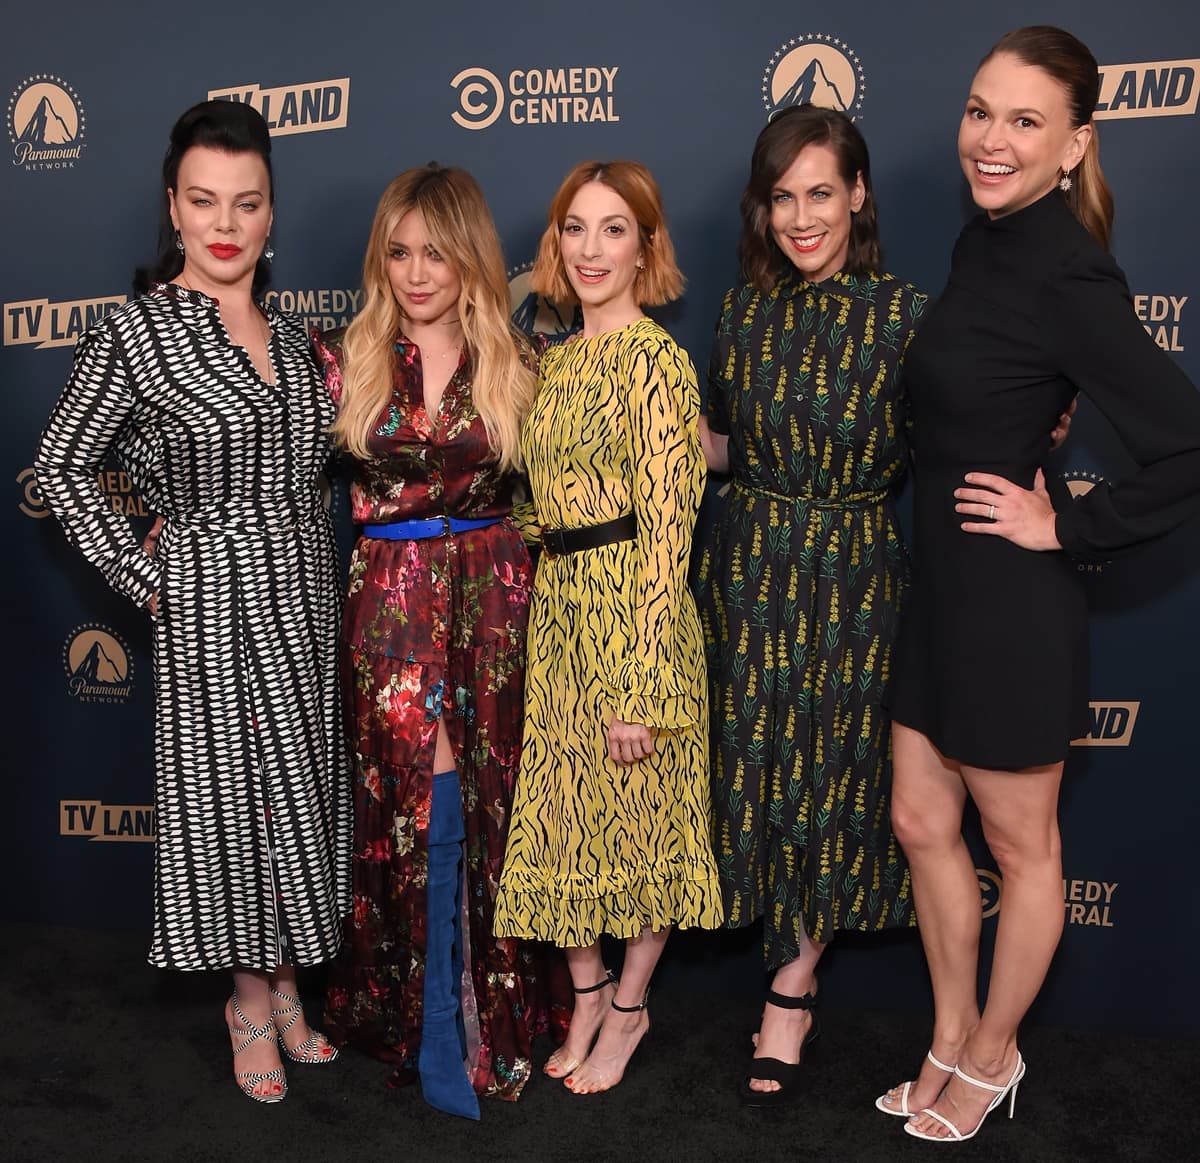 Hilary Duff looks short surrounded by Sutton Foster, Debi Mazur, Miriam Shor, and Molly Bernard